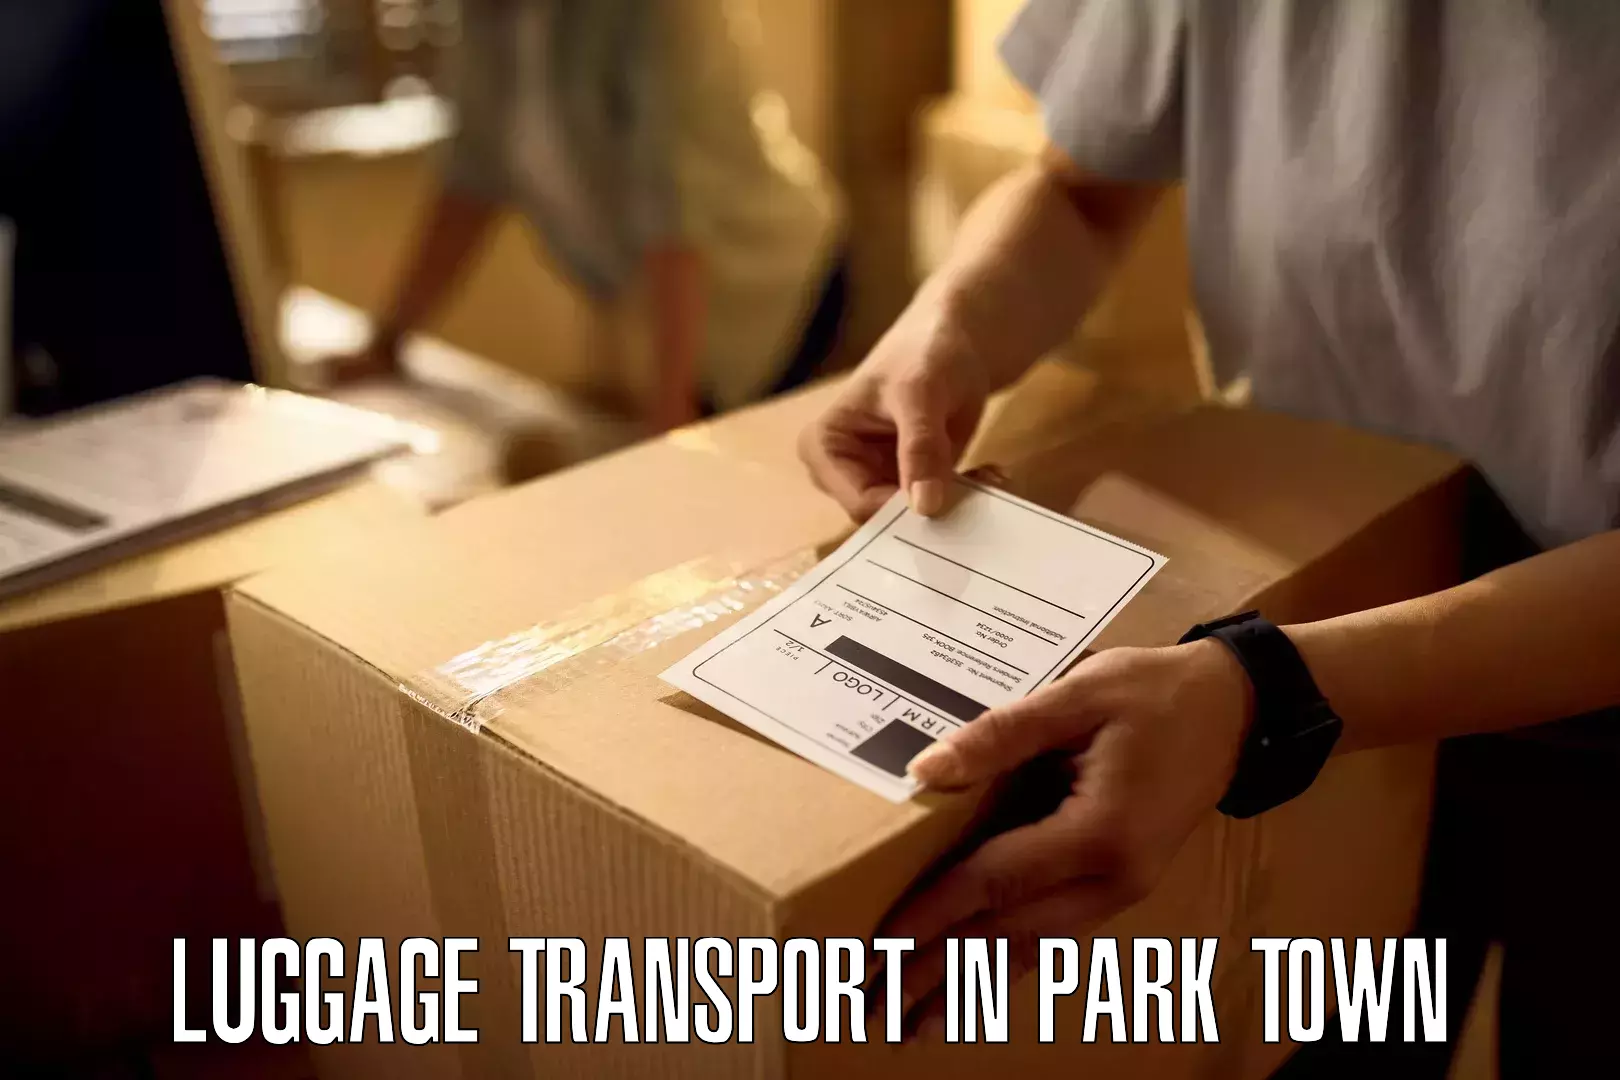 Domestic luggage transport in Park Town